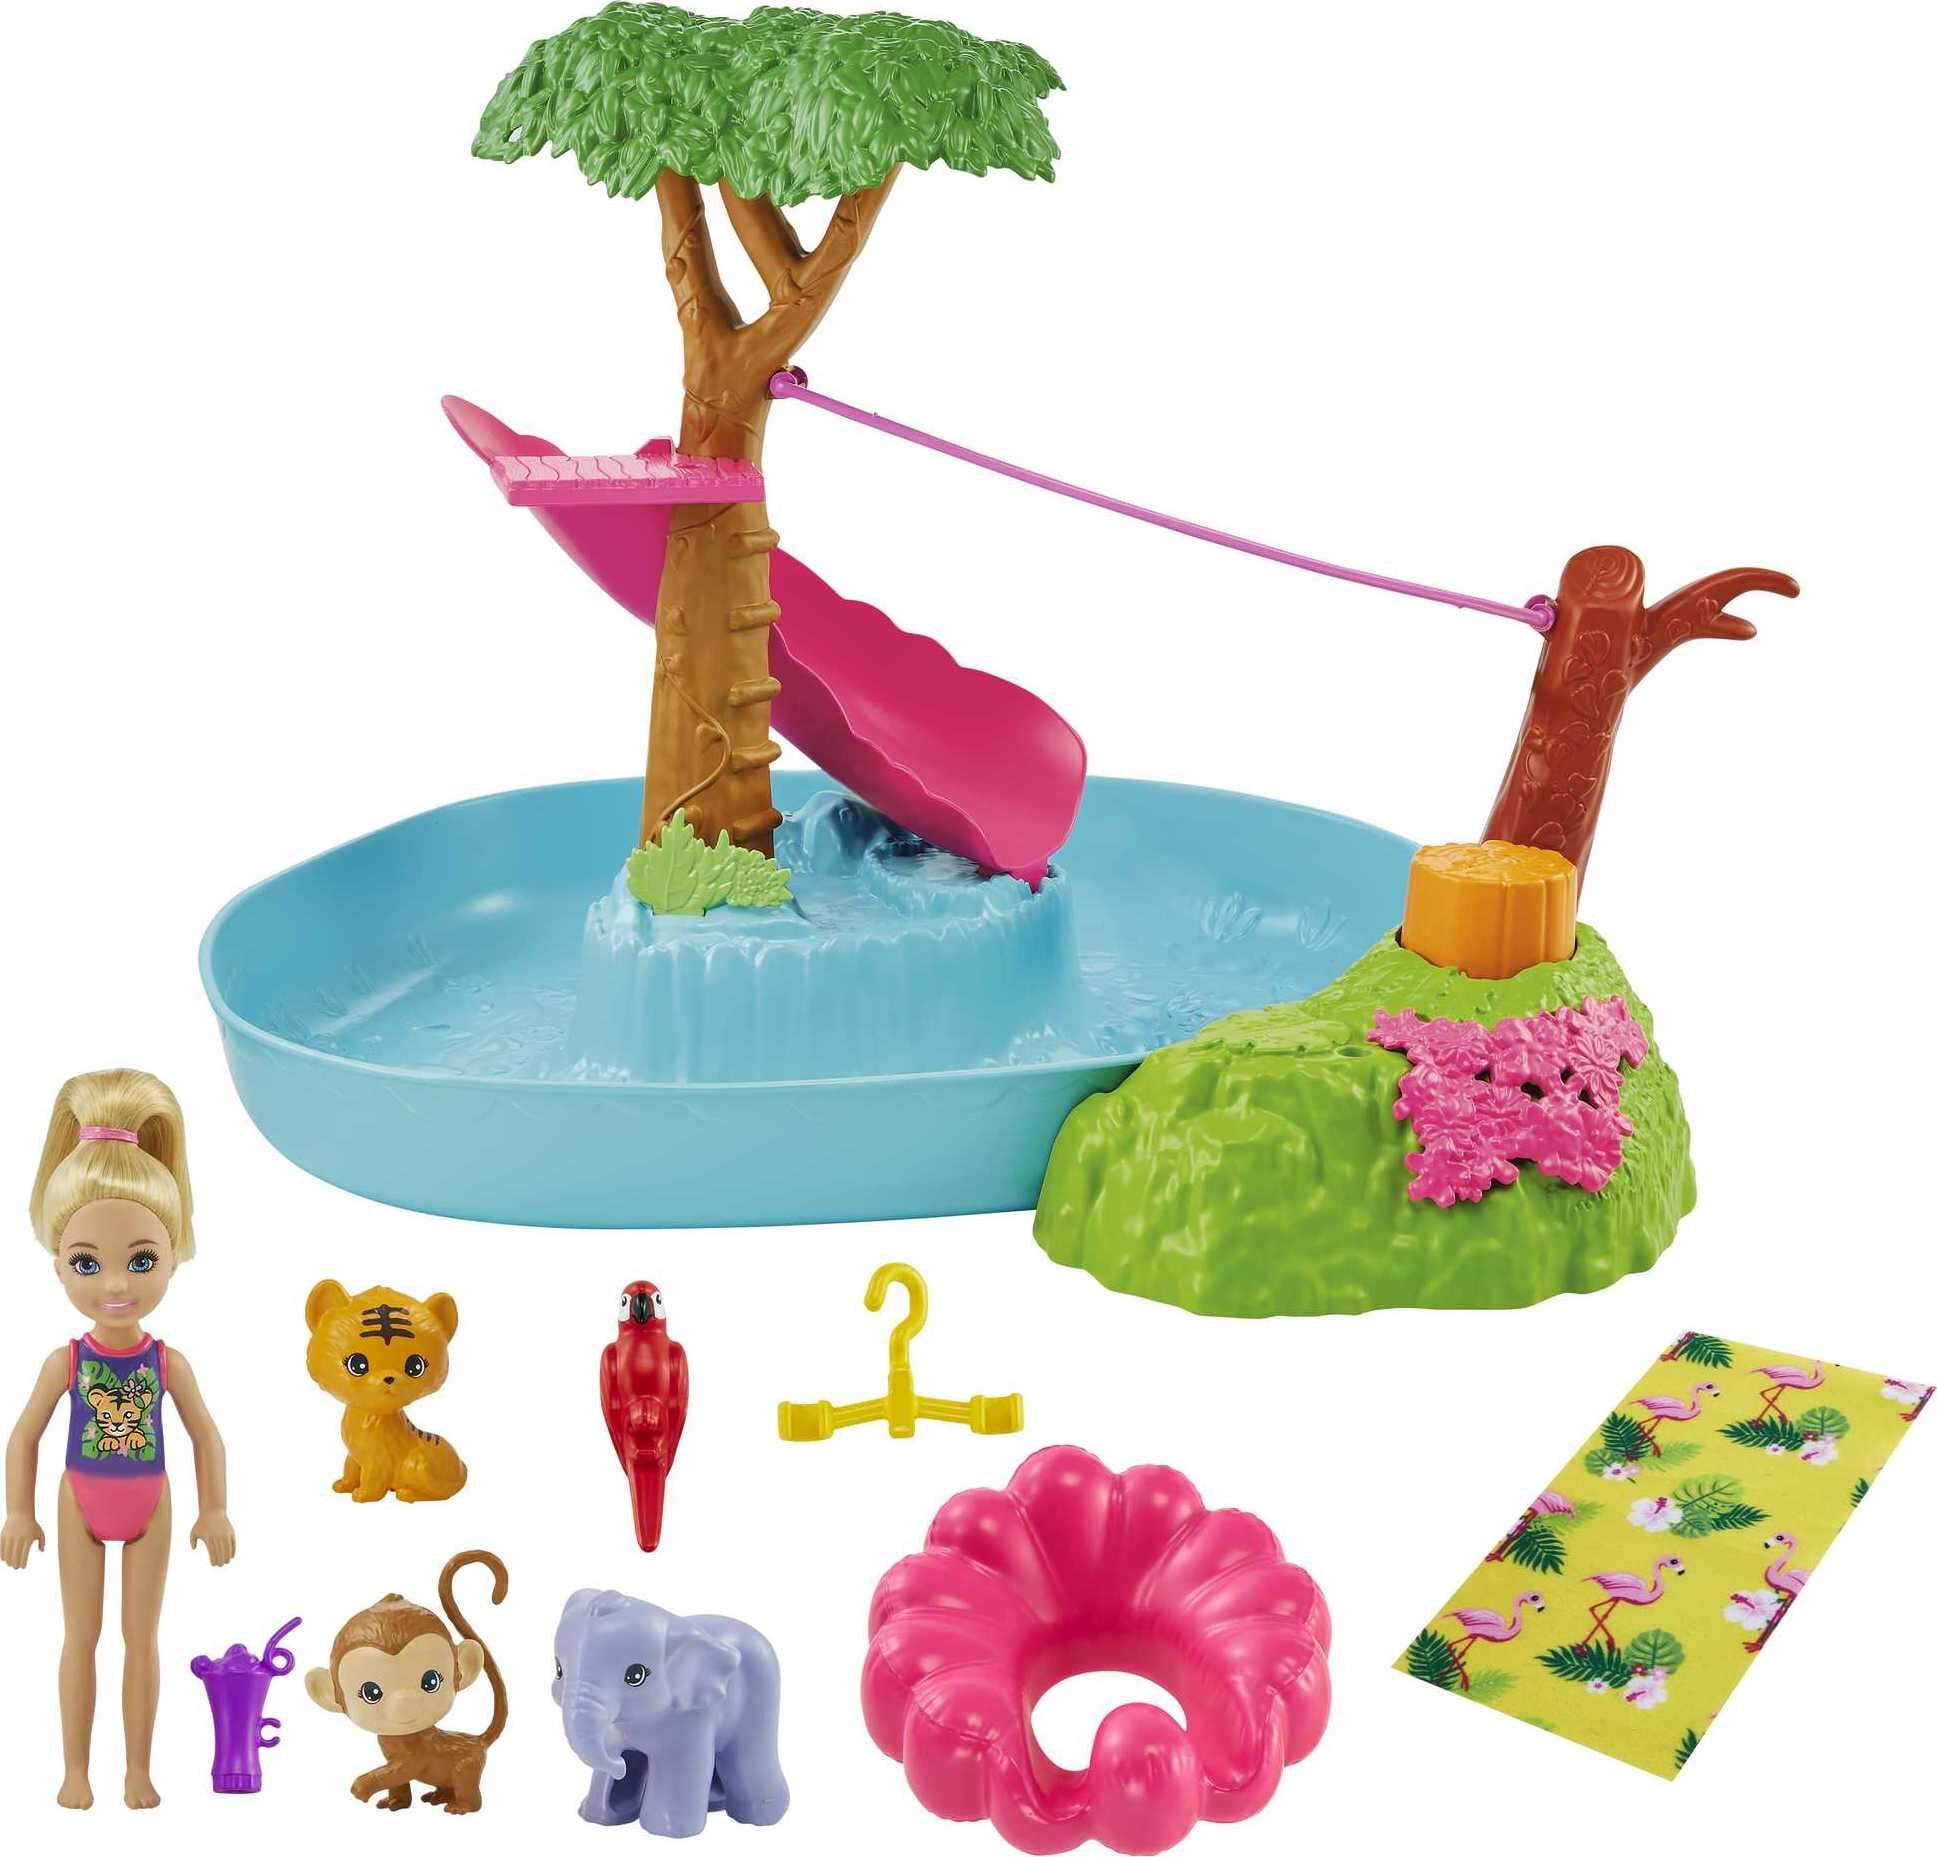 11.5-in Barbie and Chelsea The Lost Birthday Playset with Barbie Doll Gift for 3 to 7 Year Olds Pet Puppy and Travel Accessories